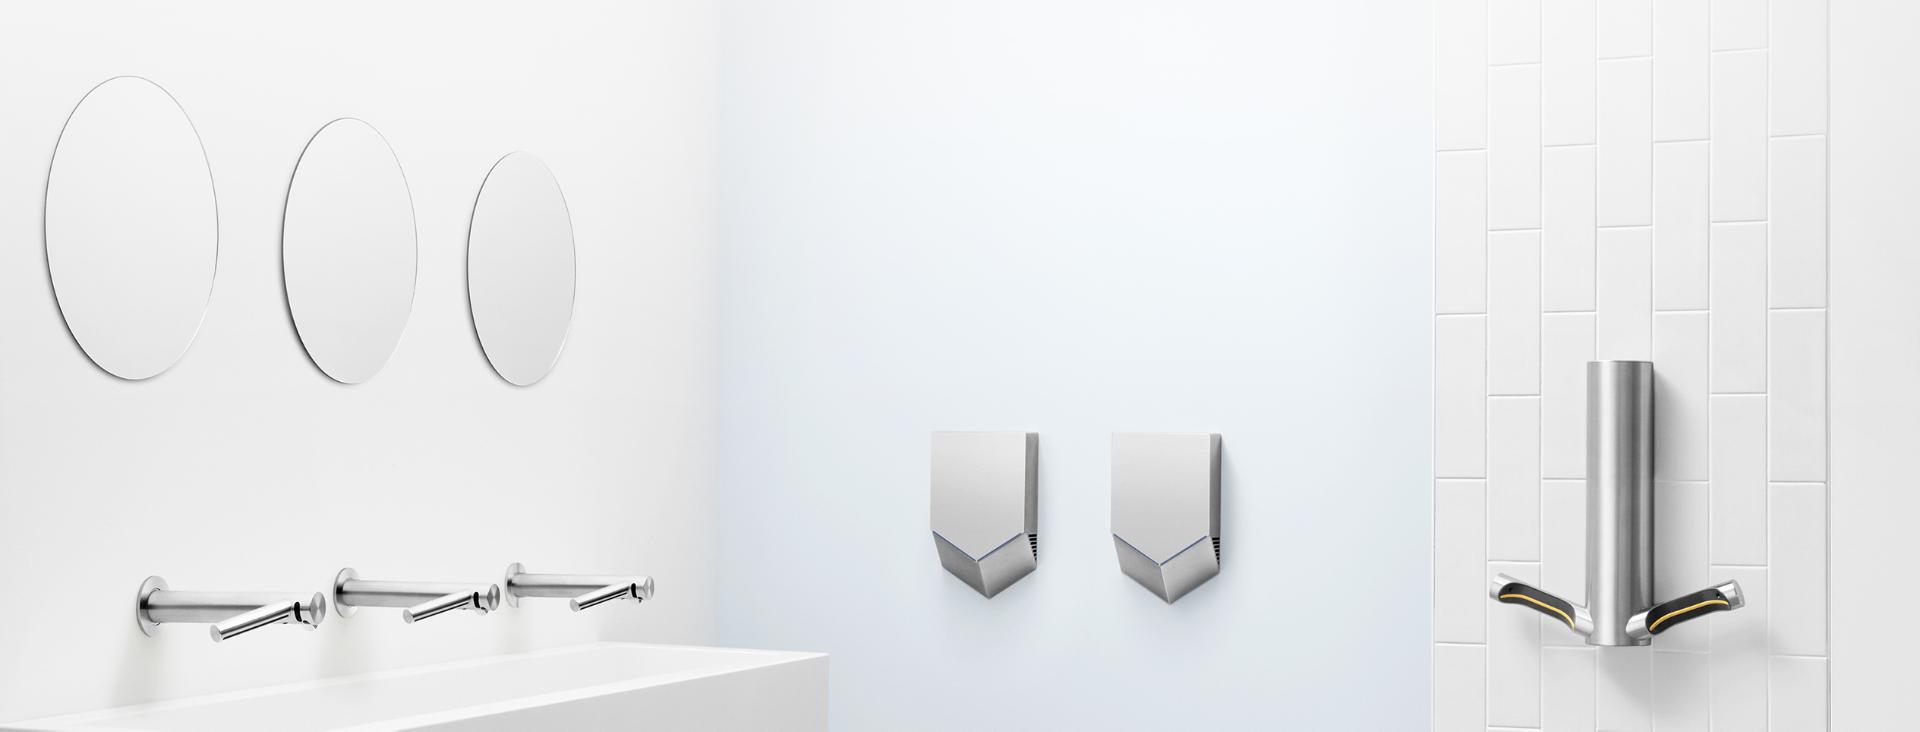 Dyson Airblade™ hand dryers product range: Airblade 9kJ, Airblade V and Airblade Wash+Dry